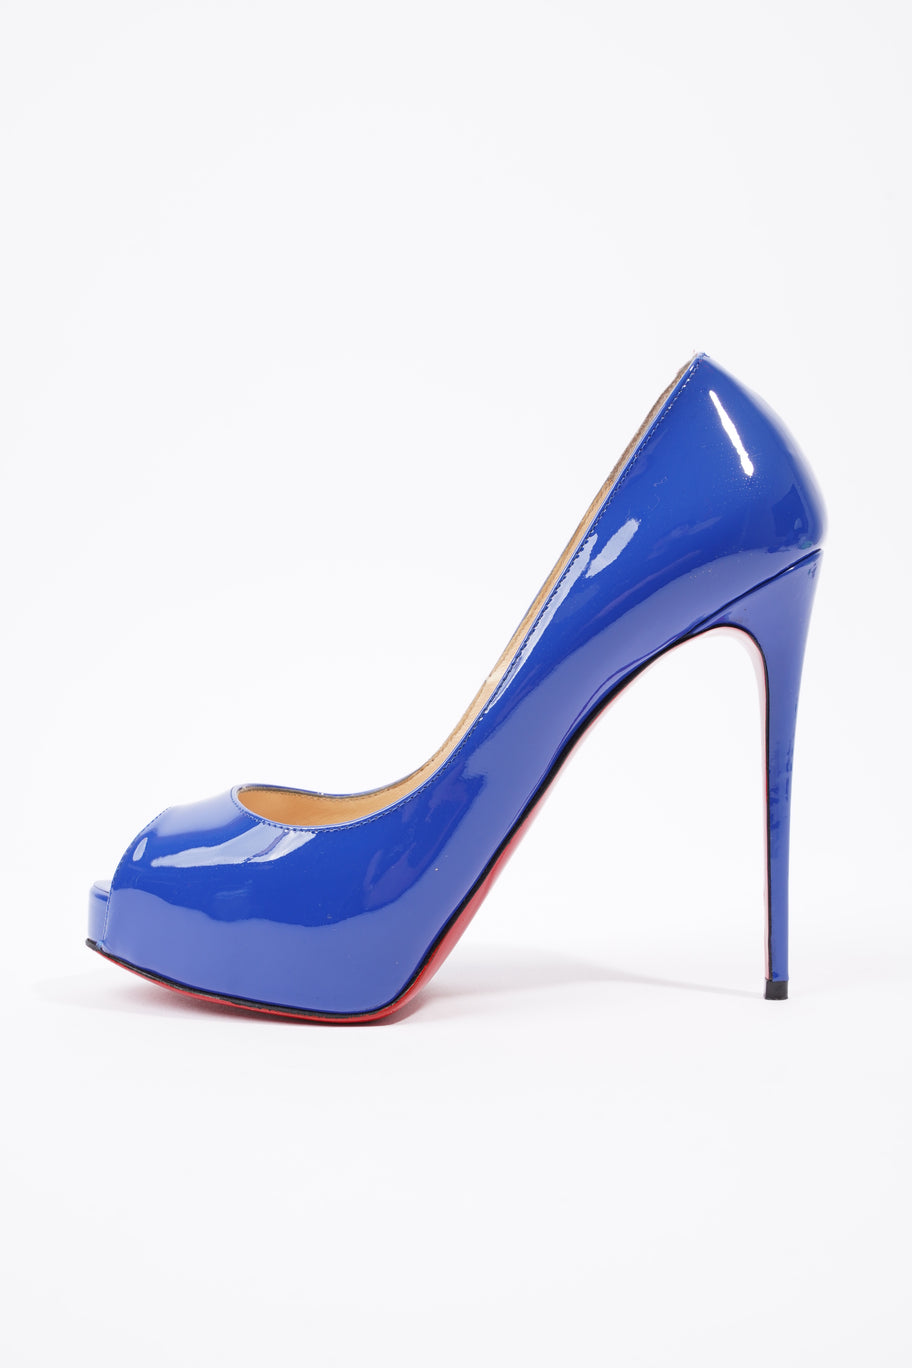 New Very Prive Heels 120 Blue Patent Leather EU 37.5 UK 4.5 Image 5